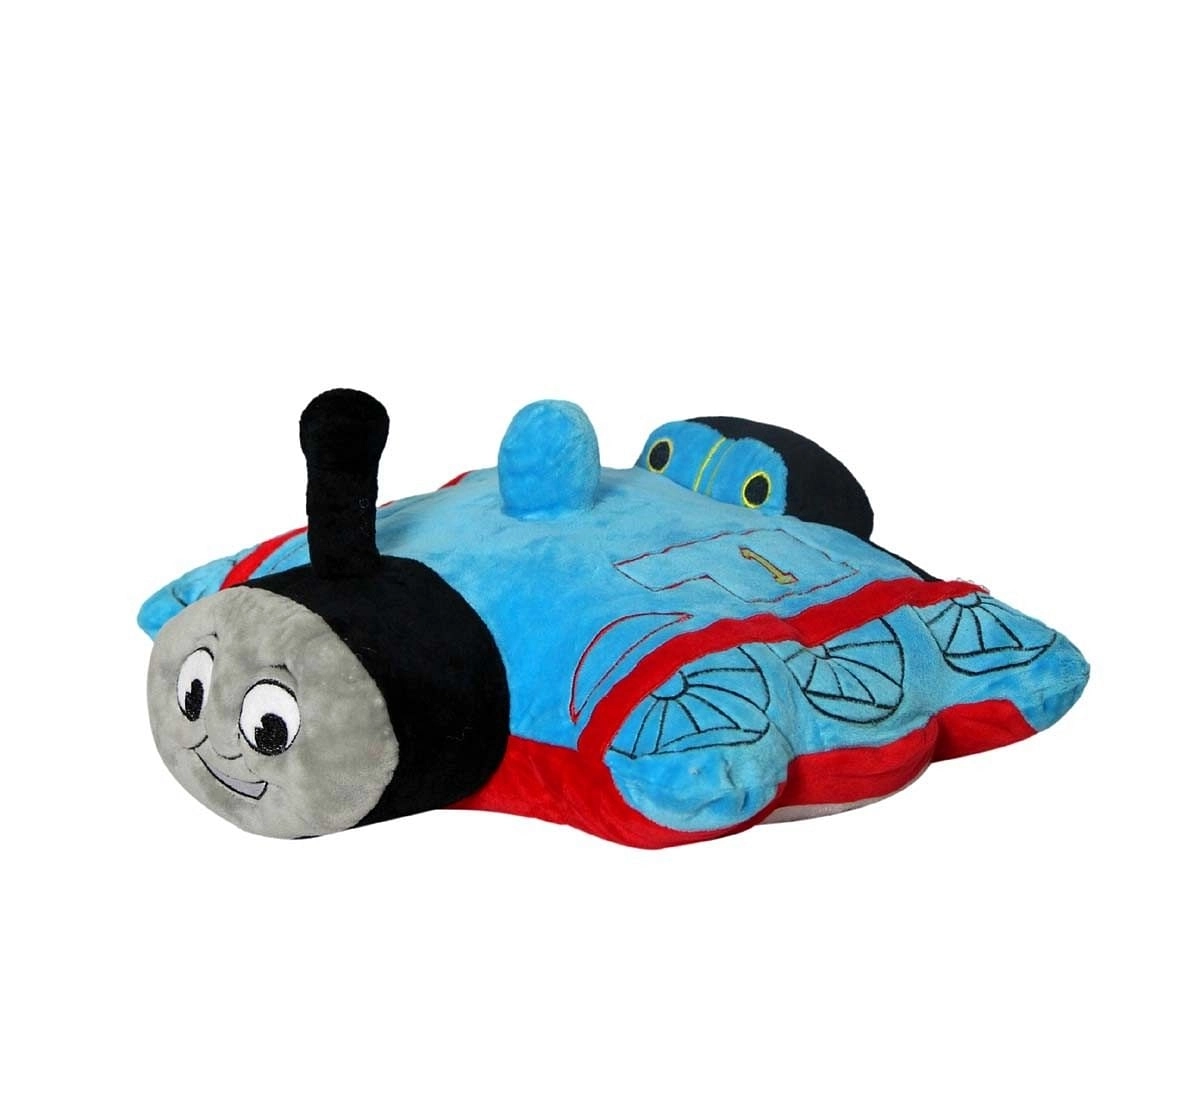 Thomas and Friends James Shape Playtoy Character Soft Toys for Kids age 12M+ 20.32 Cm 